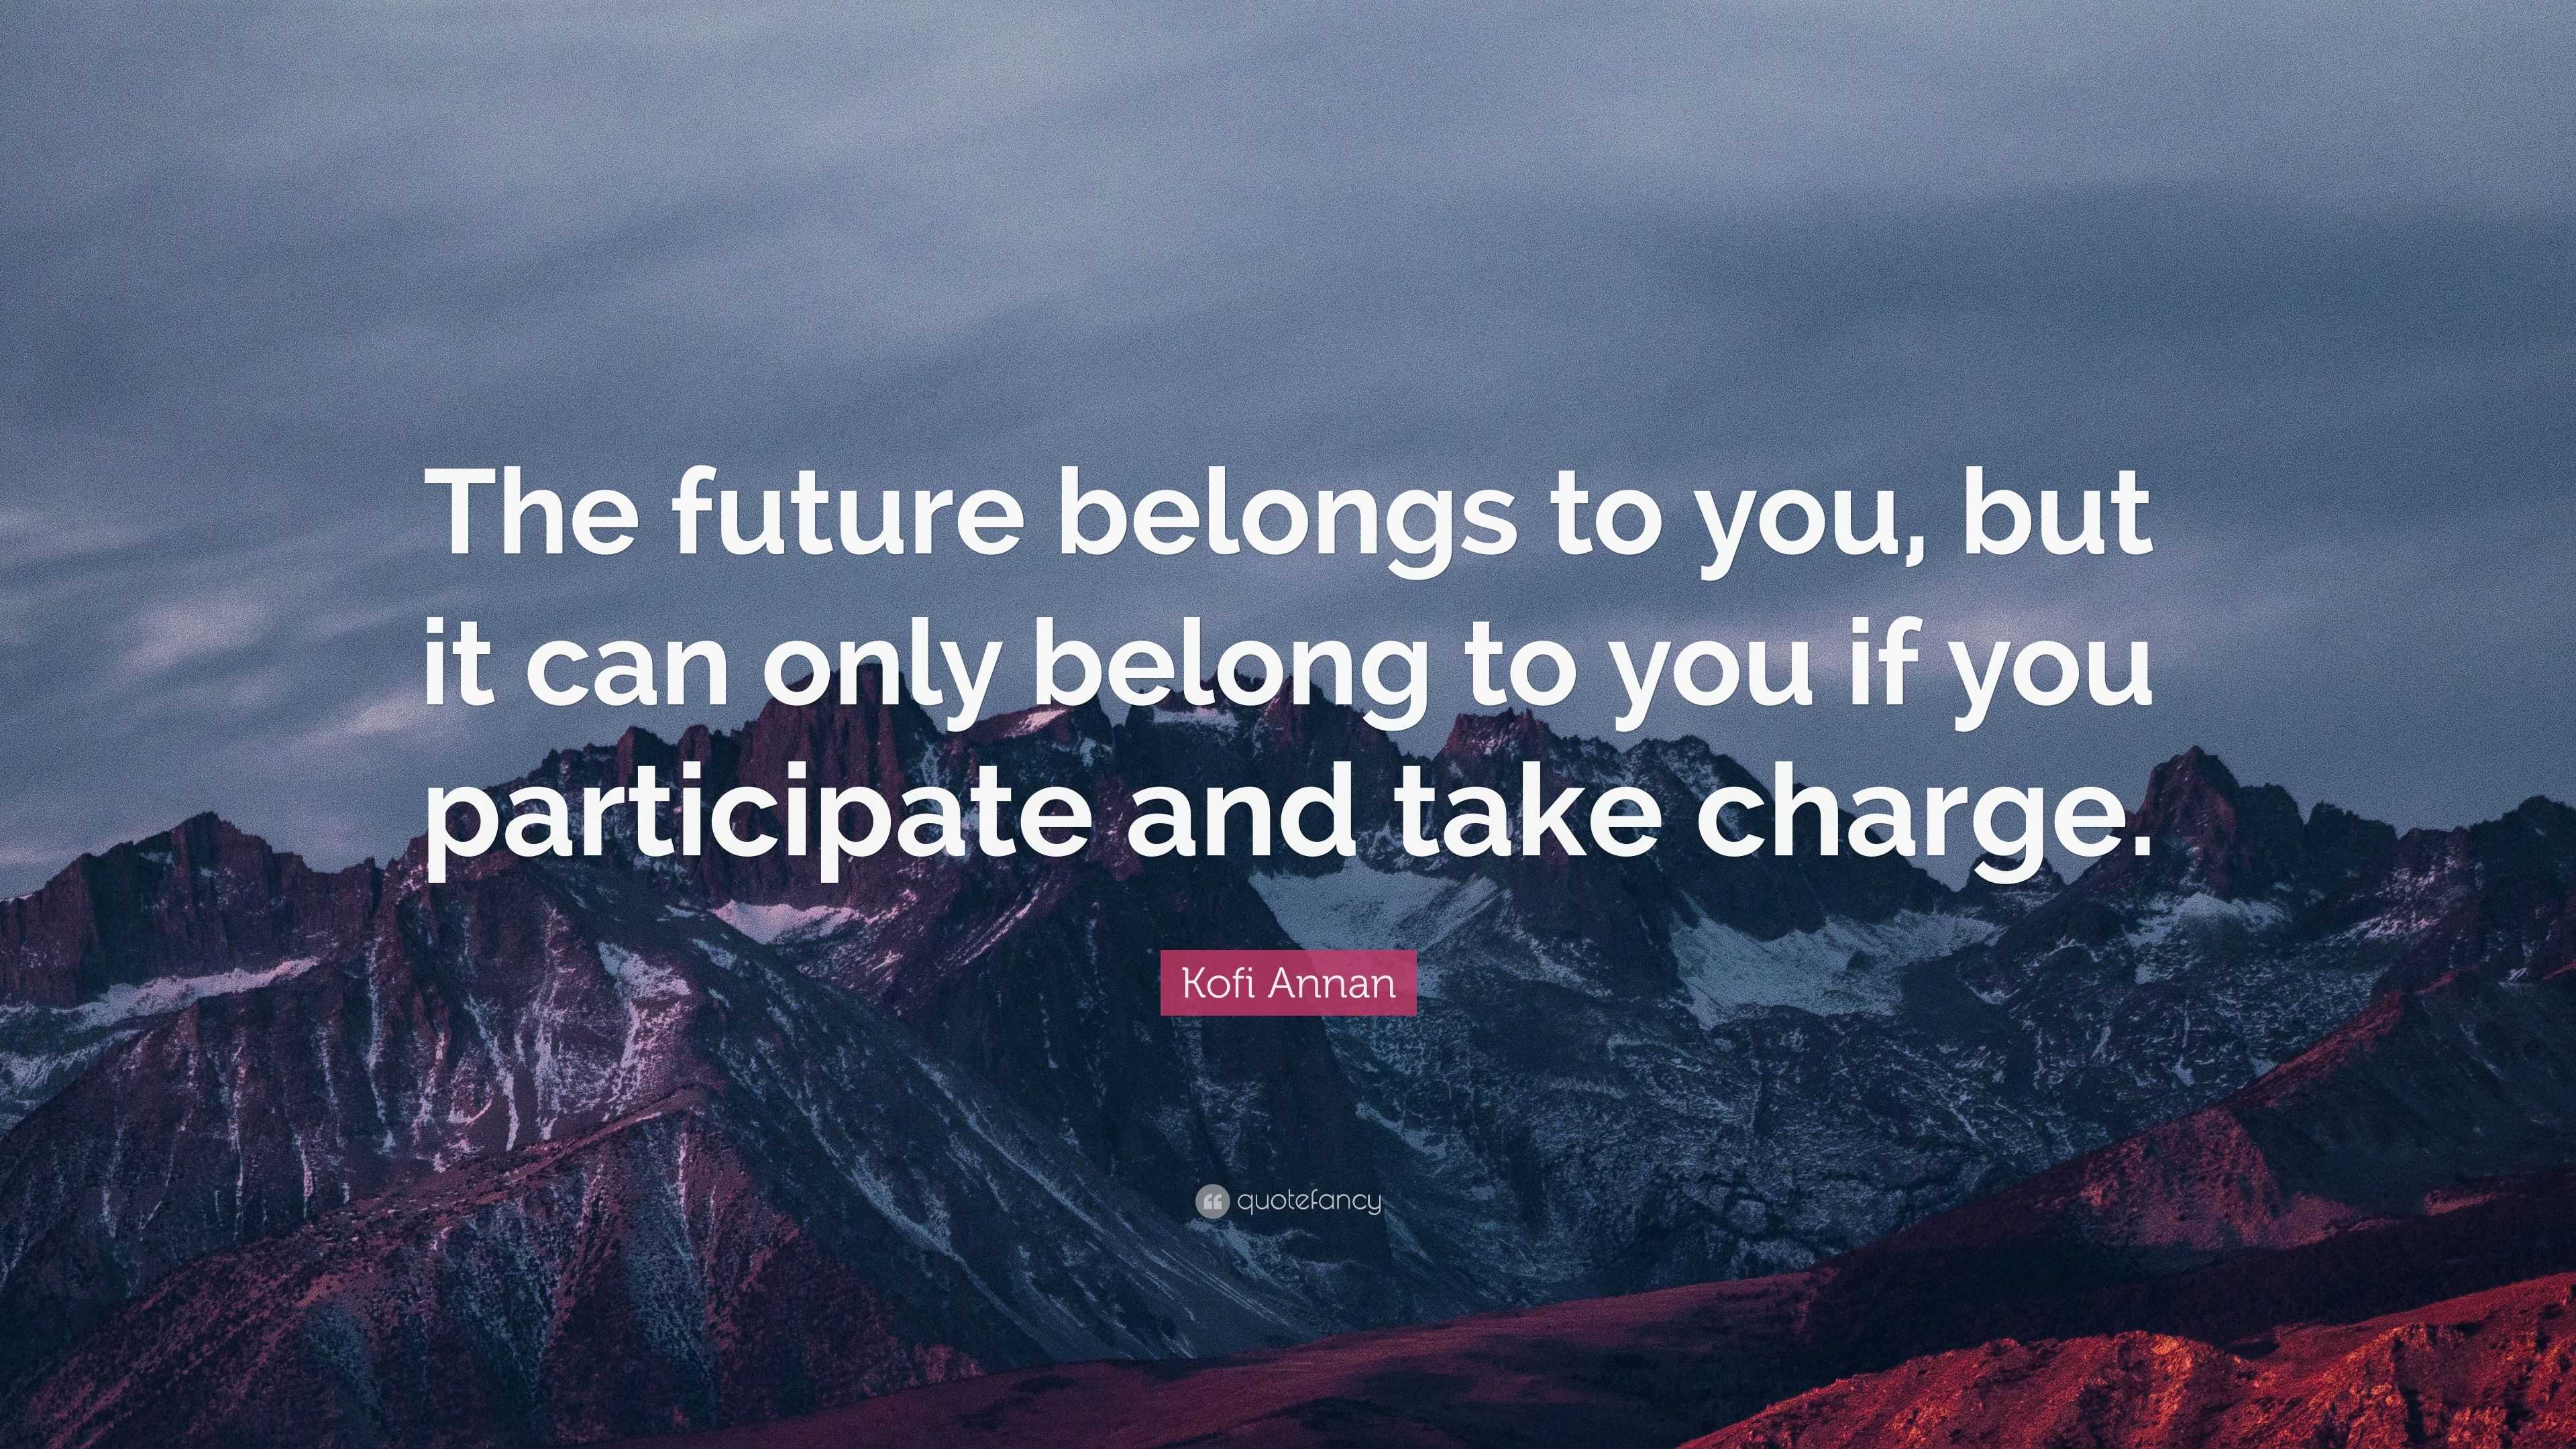 Kofi Annan Quote: “The future belongs to you, but it can only belong to ...